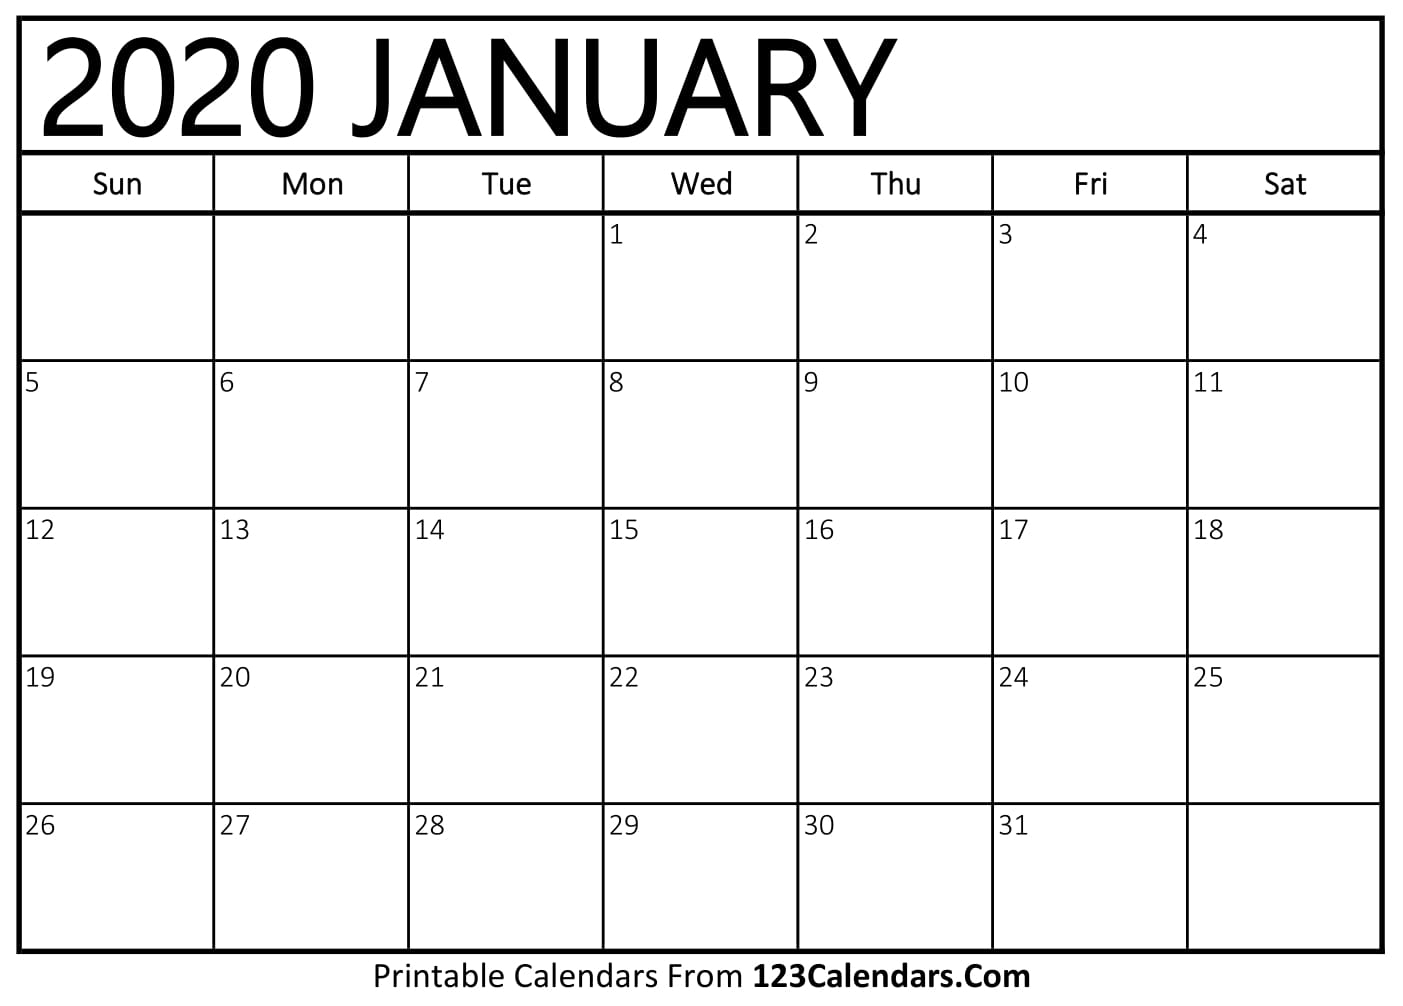 6-best-images-of-free-printable-blank-daily-schedule-free-printable-daily-schedule-daily